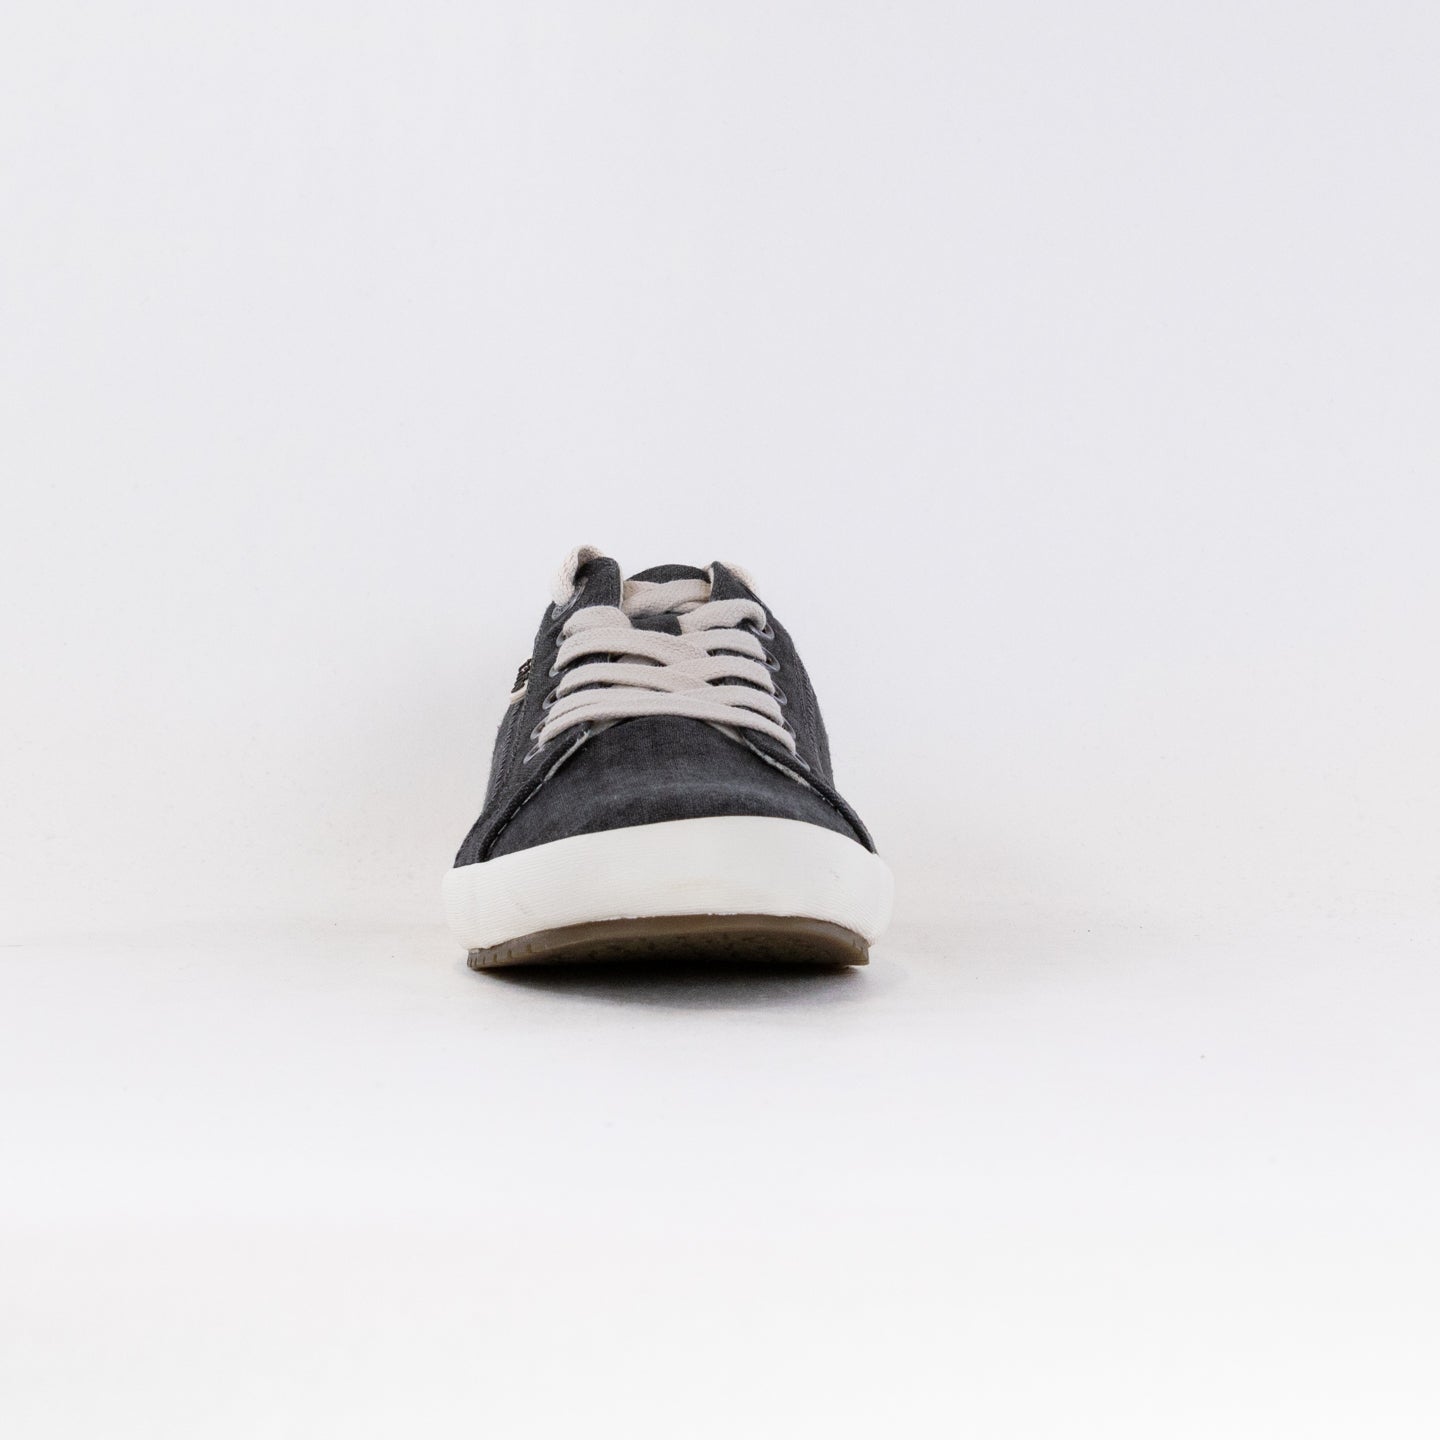 Taos Star (Women's) - Charcoal Washed Canvas